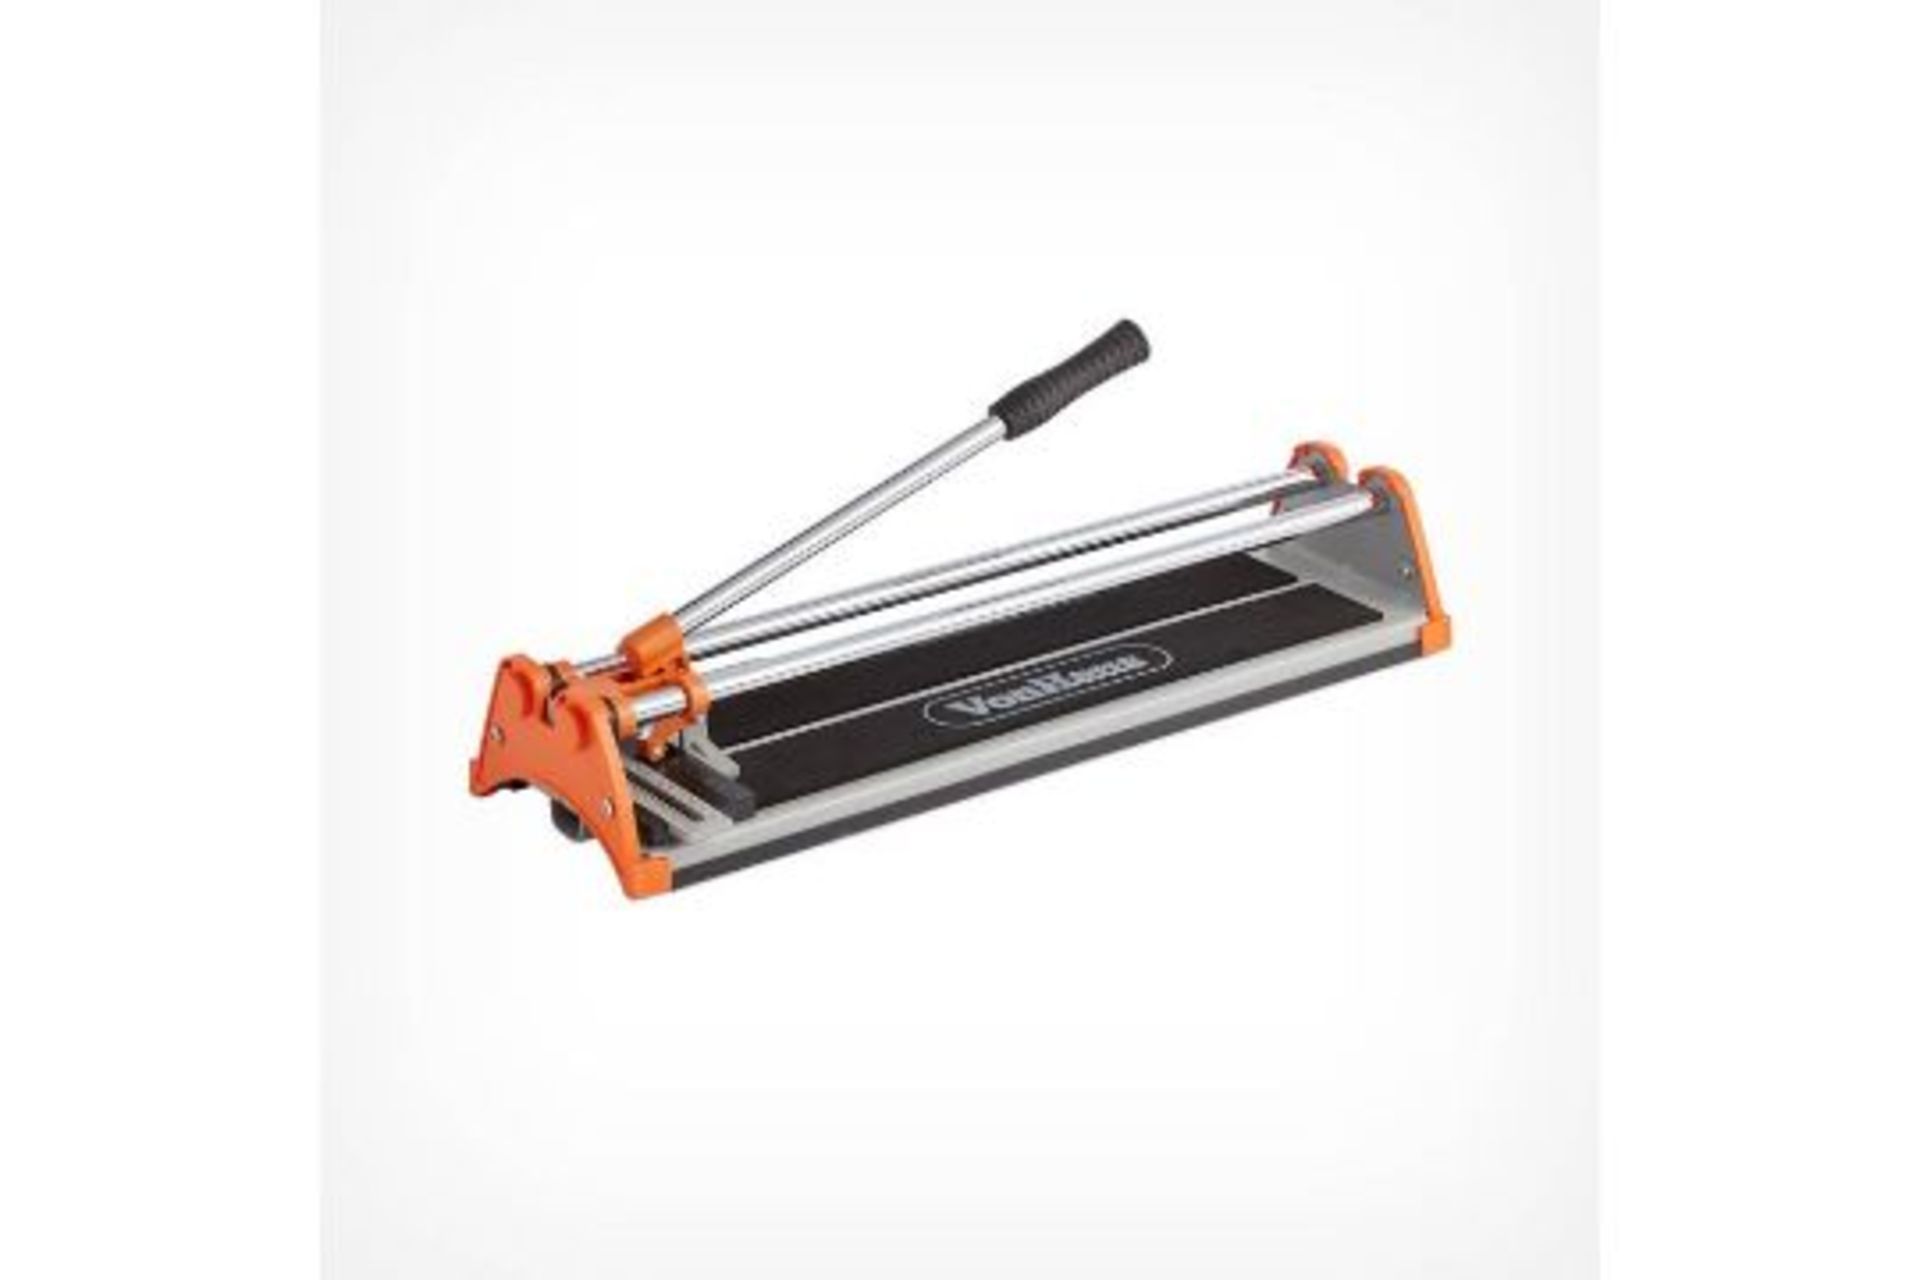 Manual Tile Cutter 430mm. -PW. With its compact size, intuitive design and simple operation, this